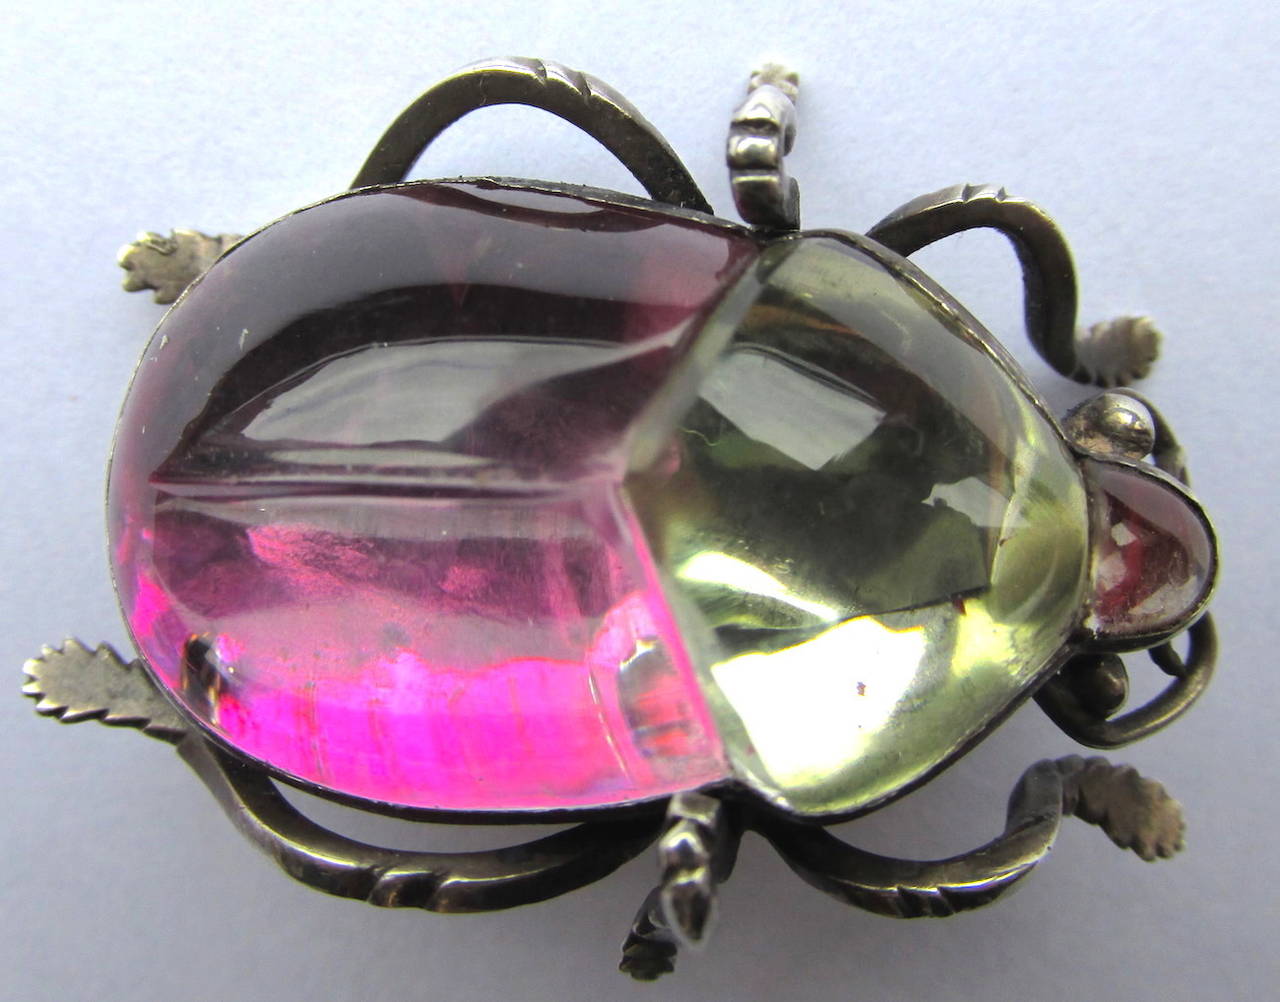 Colorful Victorian rock crystal bug pin in delightful colors of yellow and pink and purple set in white metal. Fun to wear alone on a lapel or with companions on one's shoulder. The pin measures 1 5/8